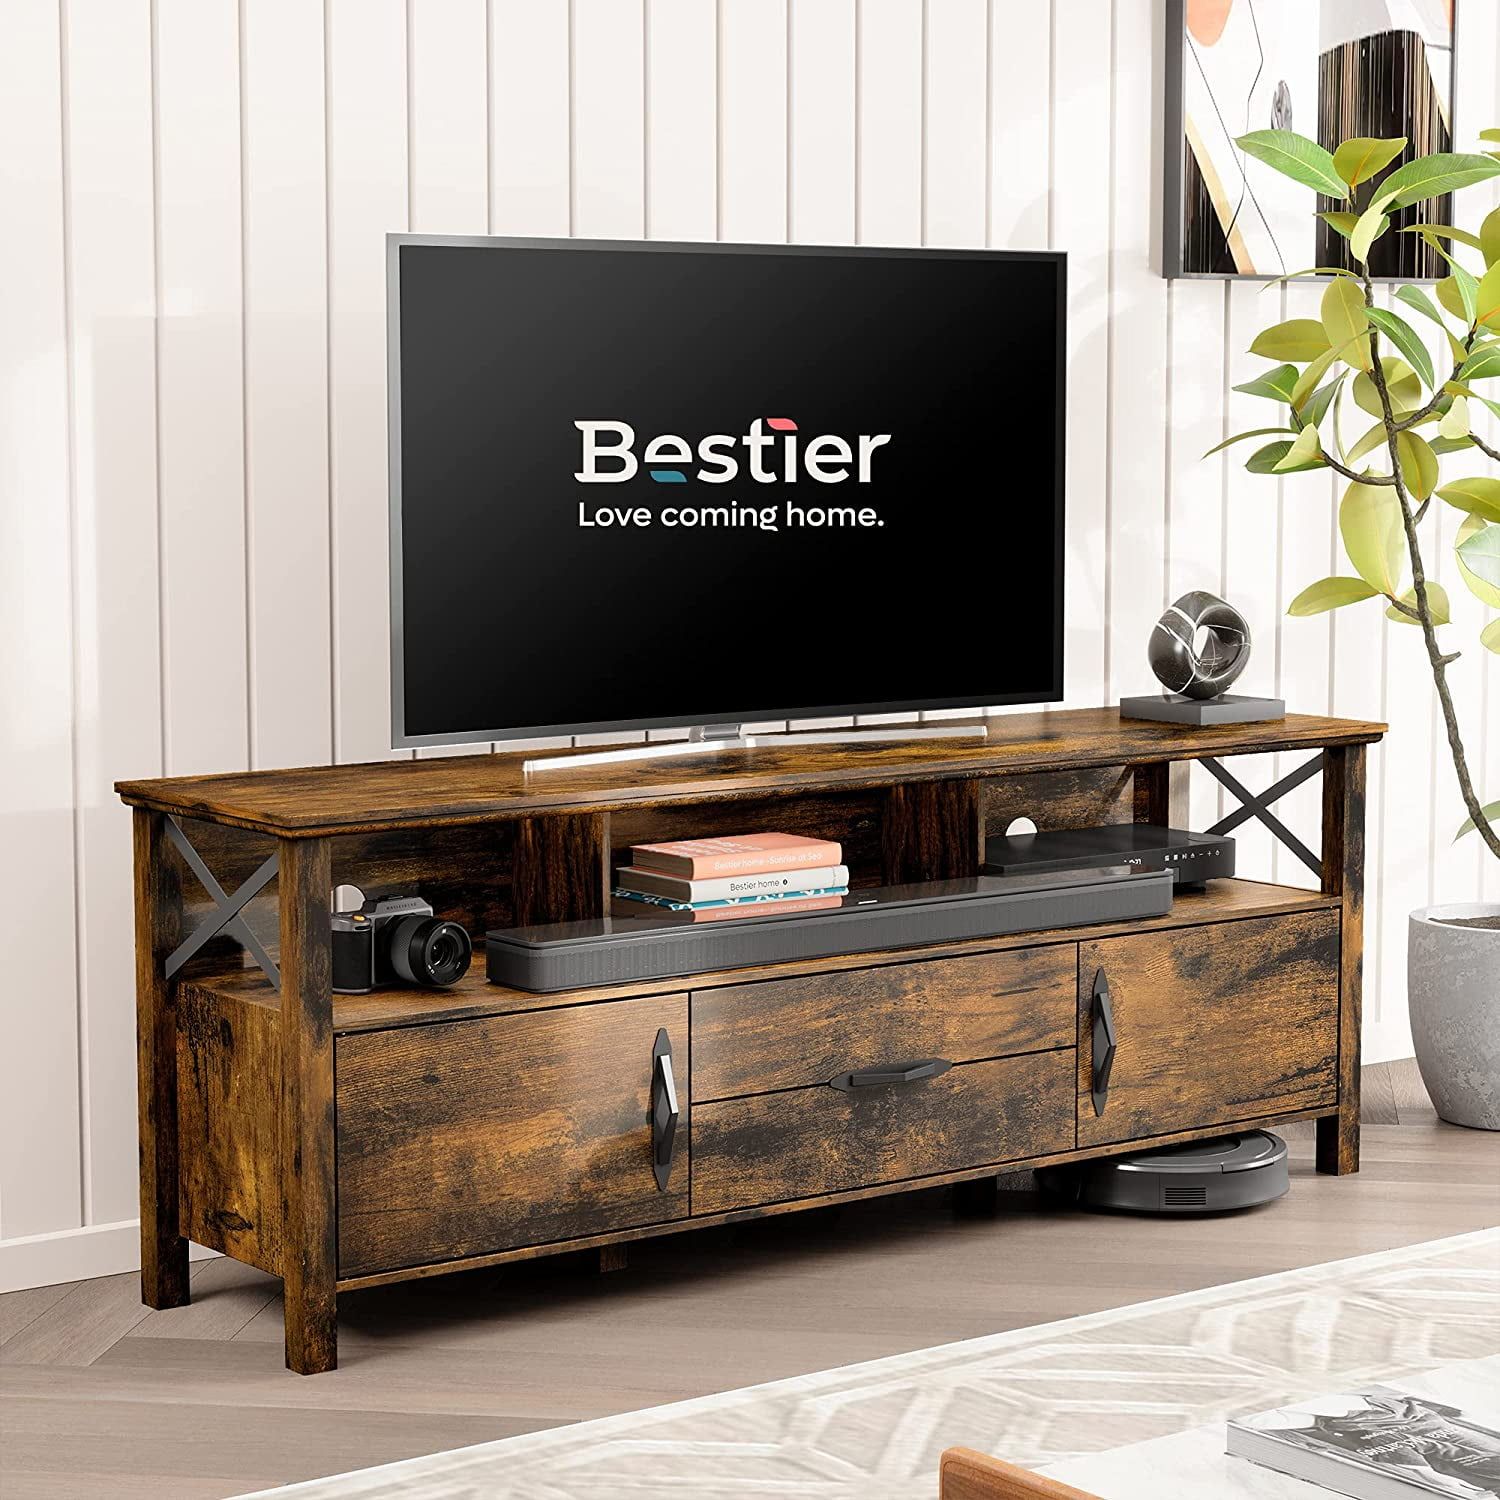 Bestier Tv Stand For Tv Up To 70 Inch, Tv Cabinet With Wooden Drawer Within Cafe Tv Stands With Storage (View 13 of 20)